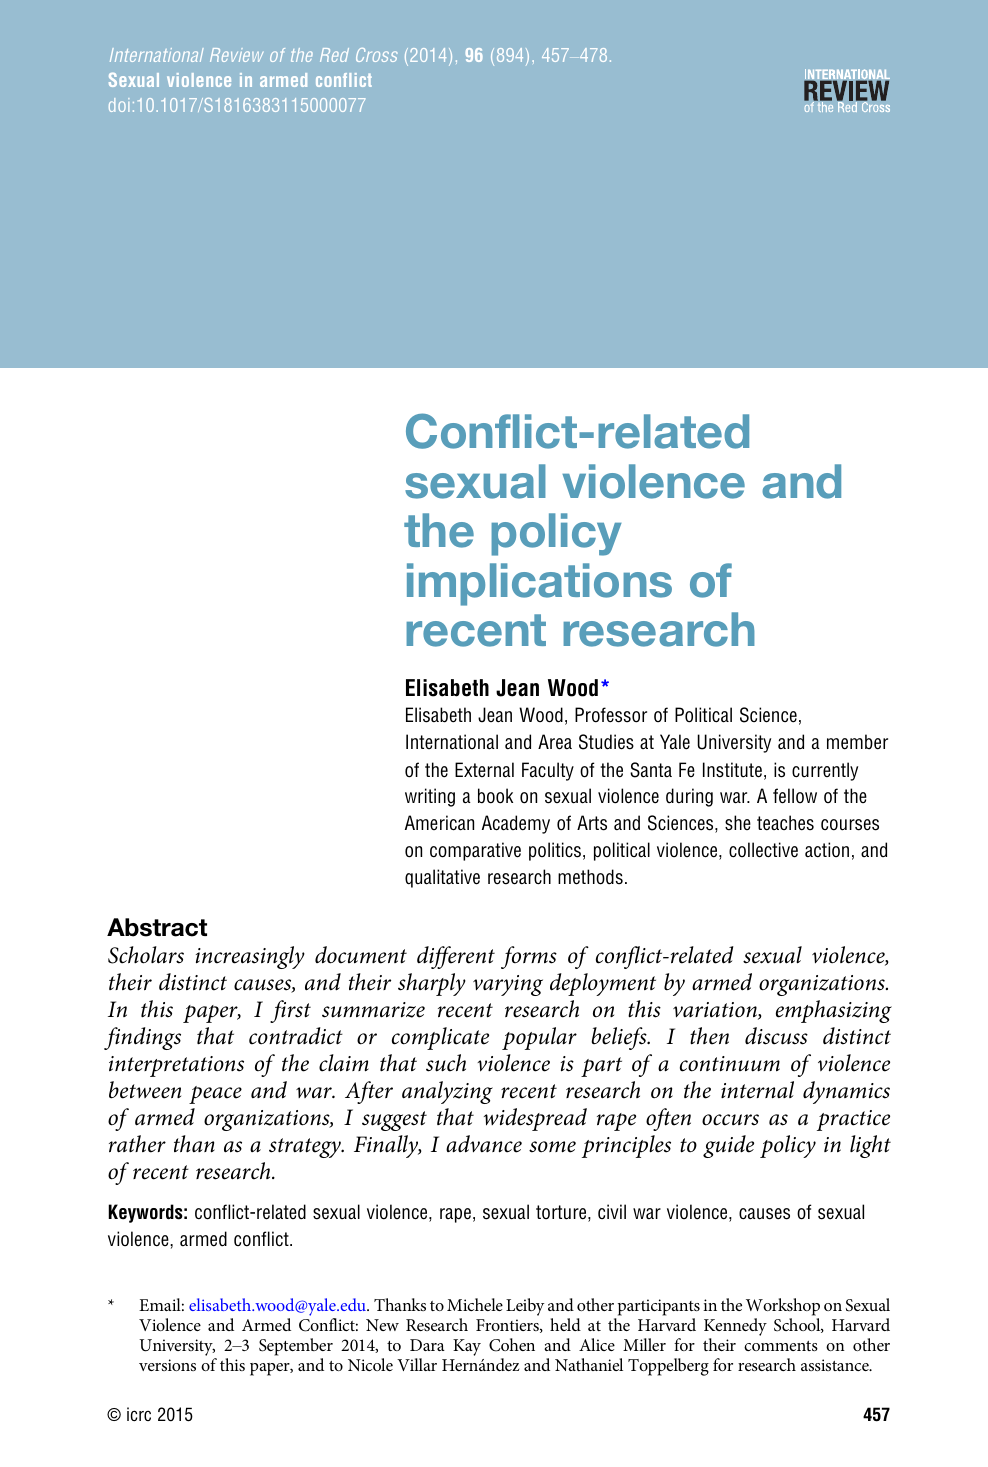 Conflict Related Sexual Violence And The Policy Implications Of